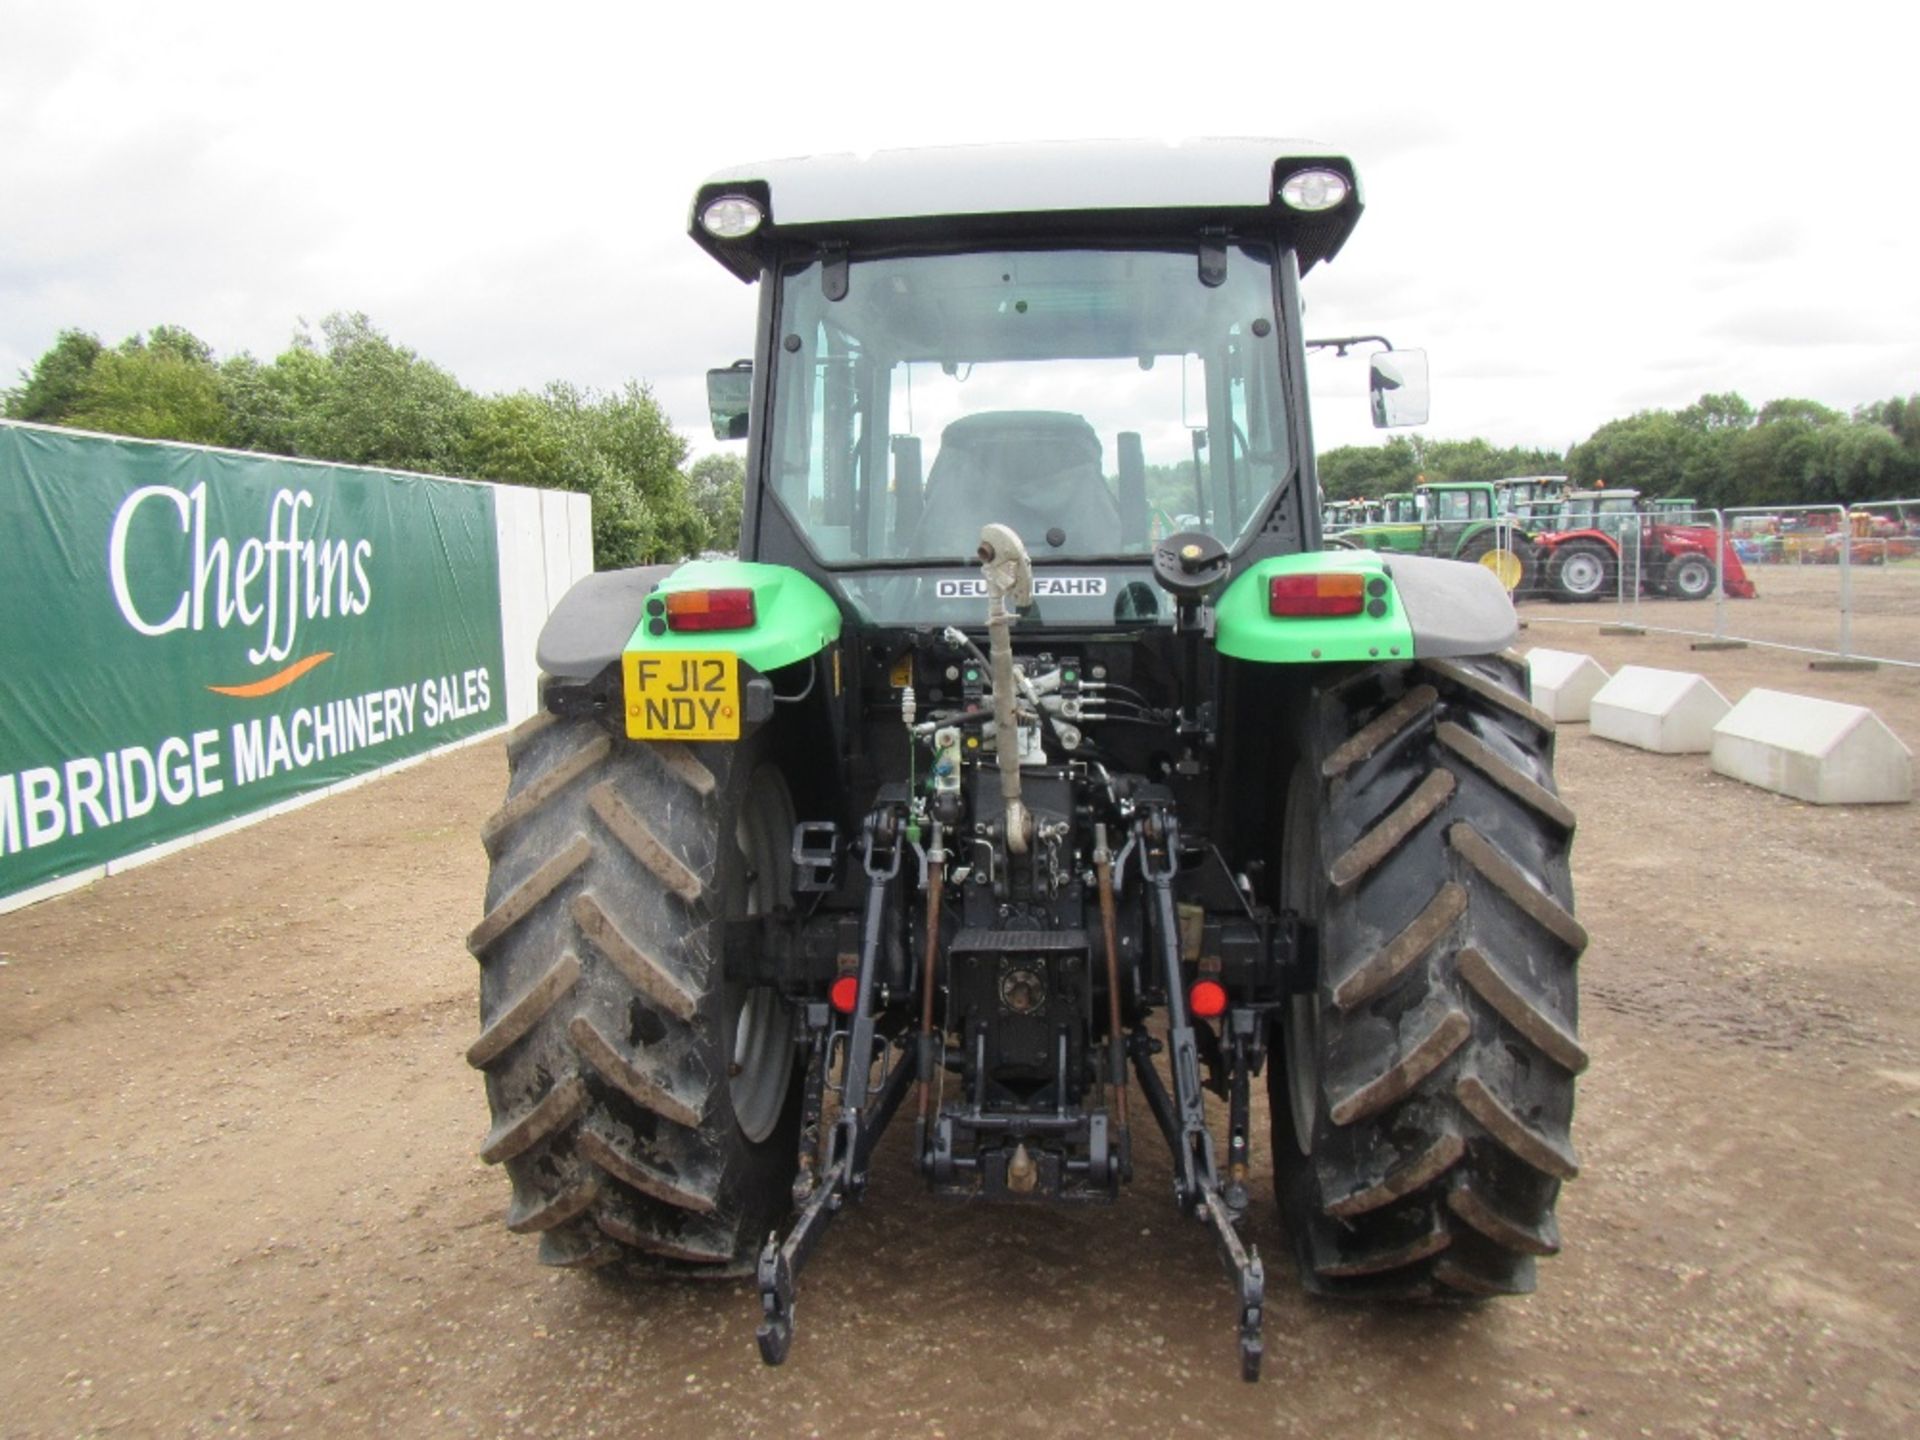 Deutz Agro Form 420 GS Tractor with Quicke Q50 Loader Reg. No. FJ12 NDY Ser No TD21871 - Image 6 of 17